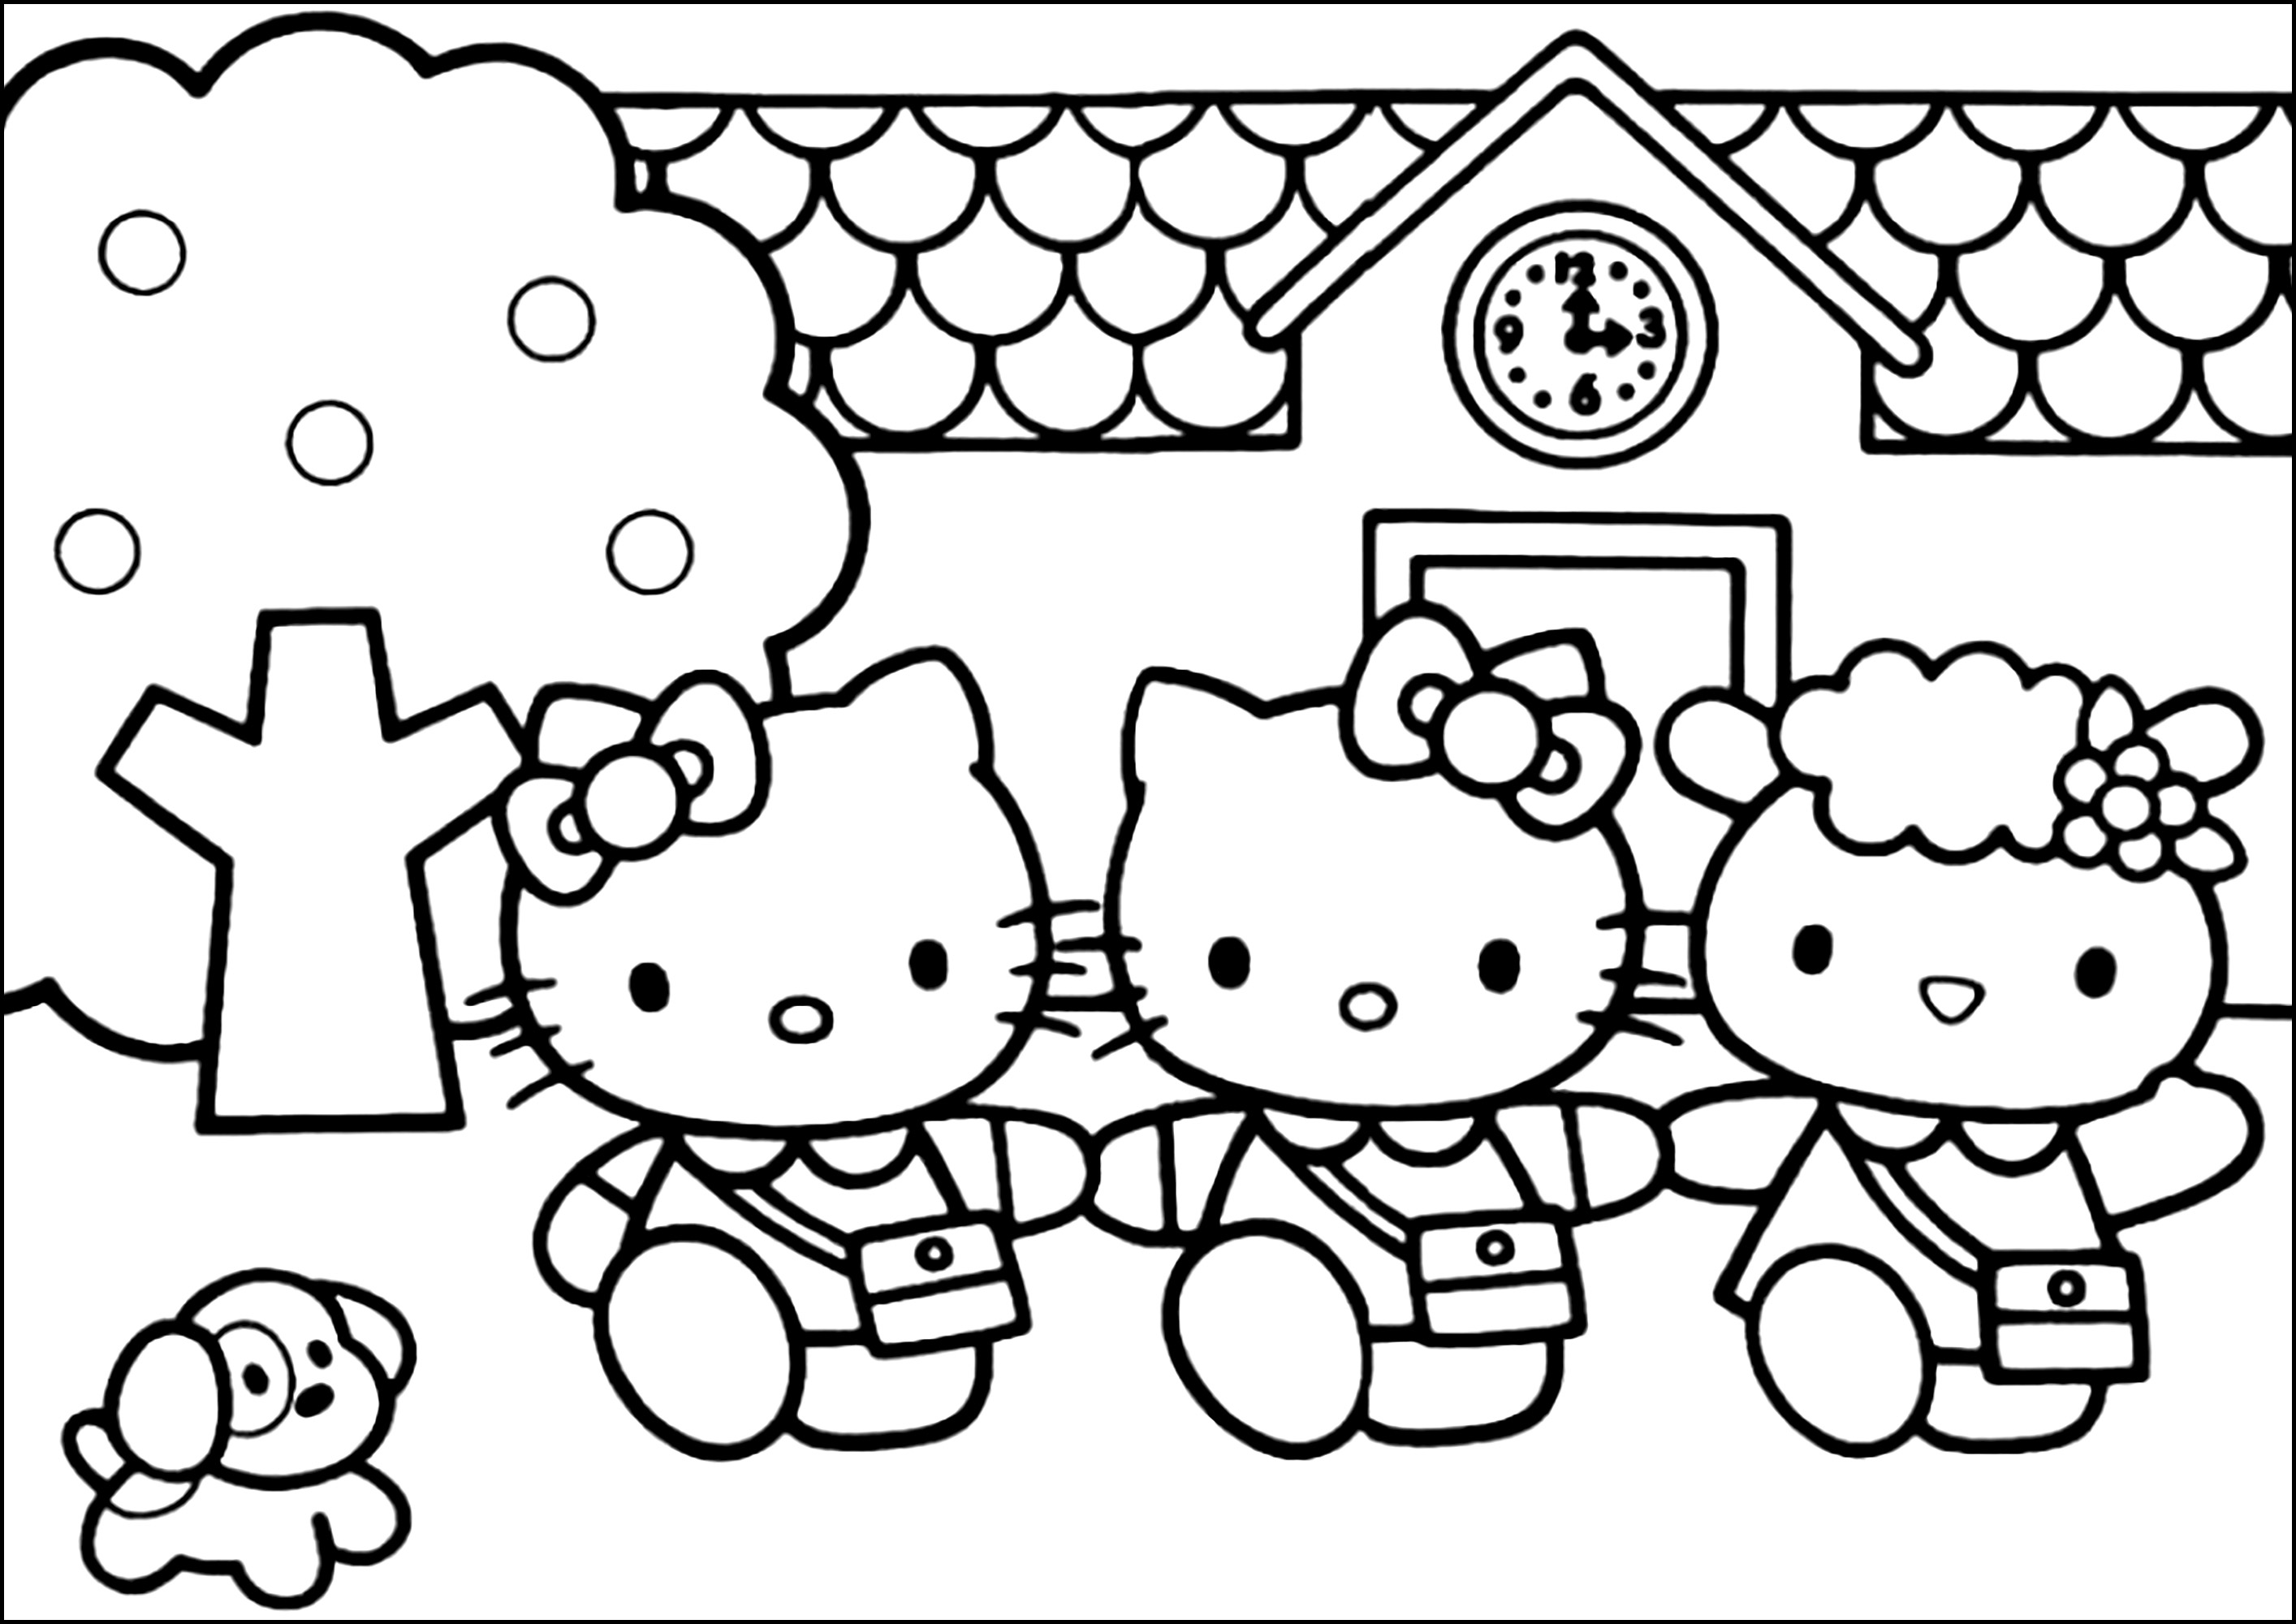 Hello Kitty at school with her friends